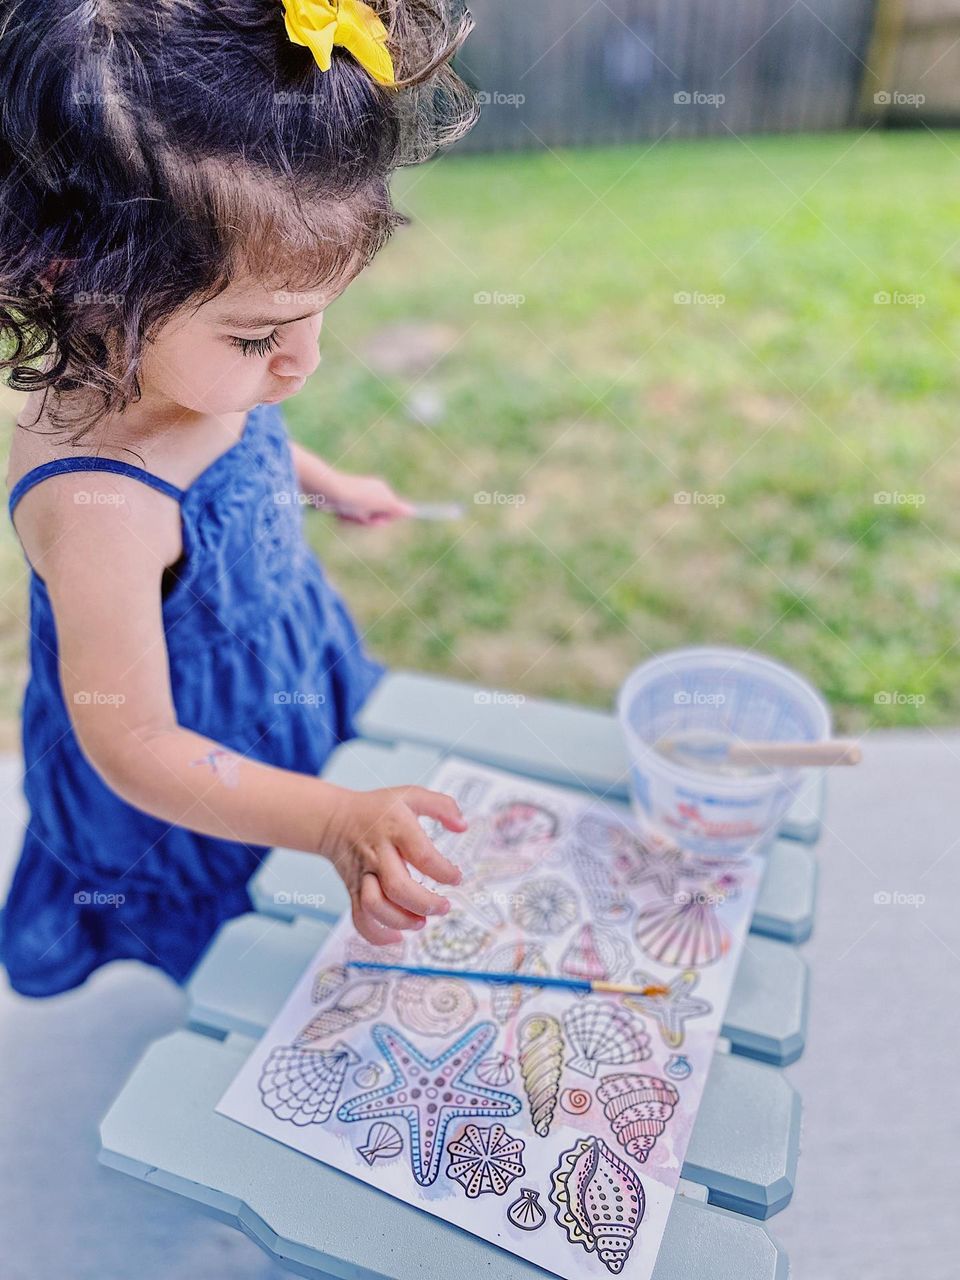 Toddler girl painting seashells outside, toddler using magic paints, fun with painting in the summertime 